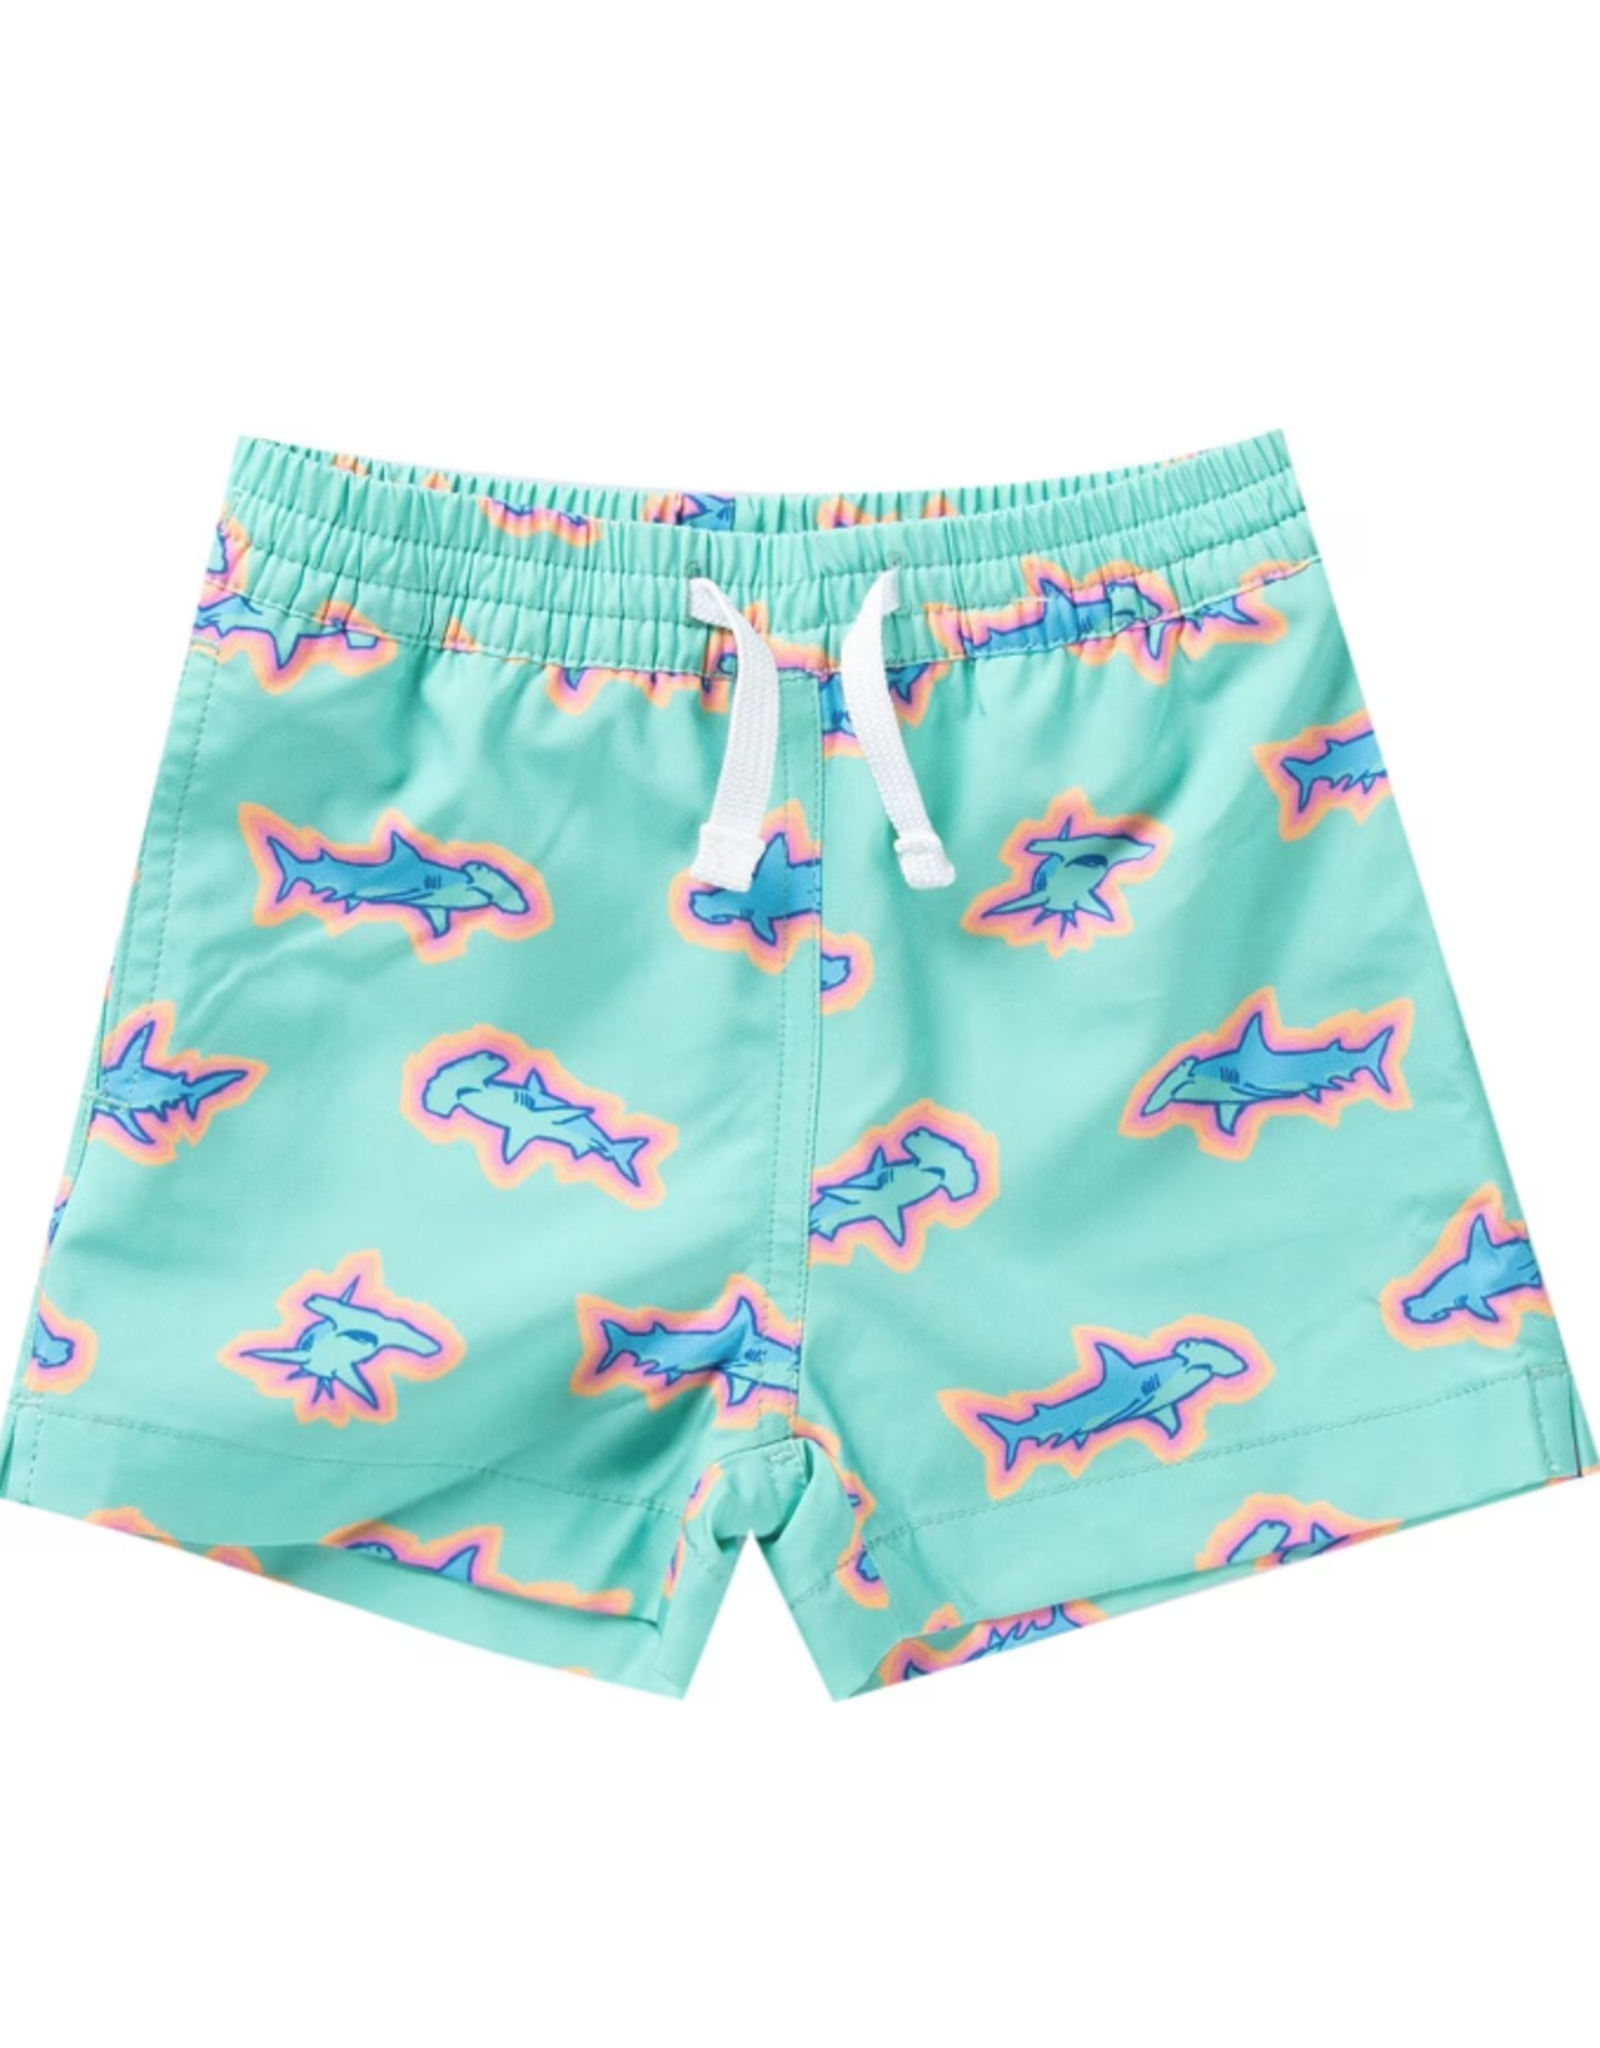 Chubbies Chubbies Swim Short - Toddlers' The Apex Swimmers